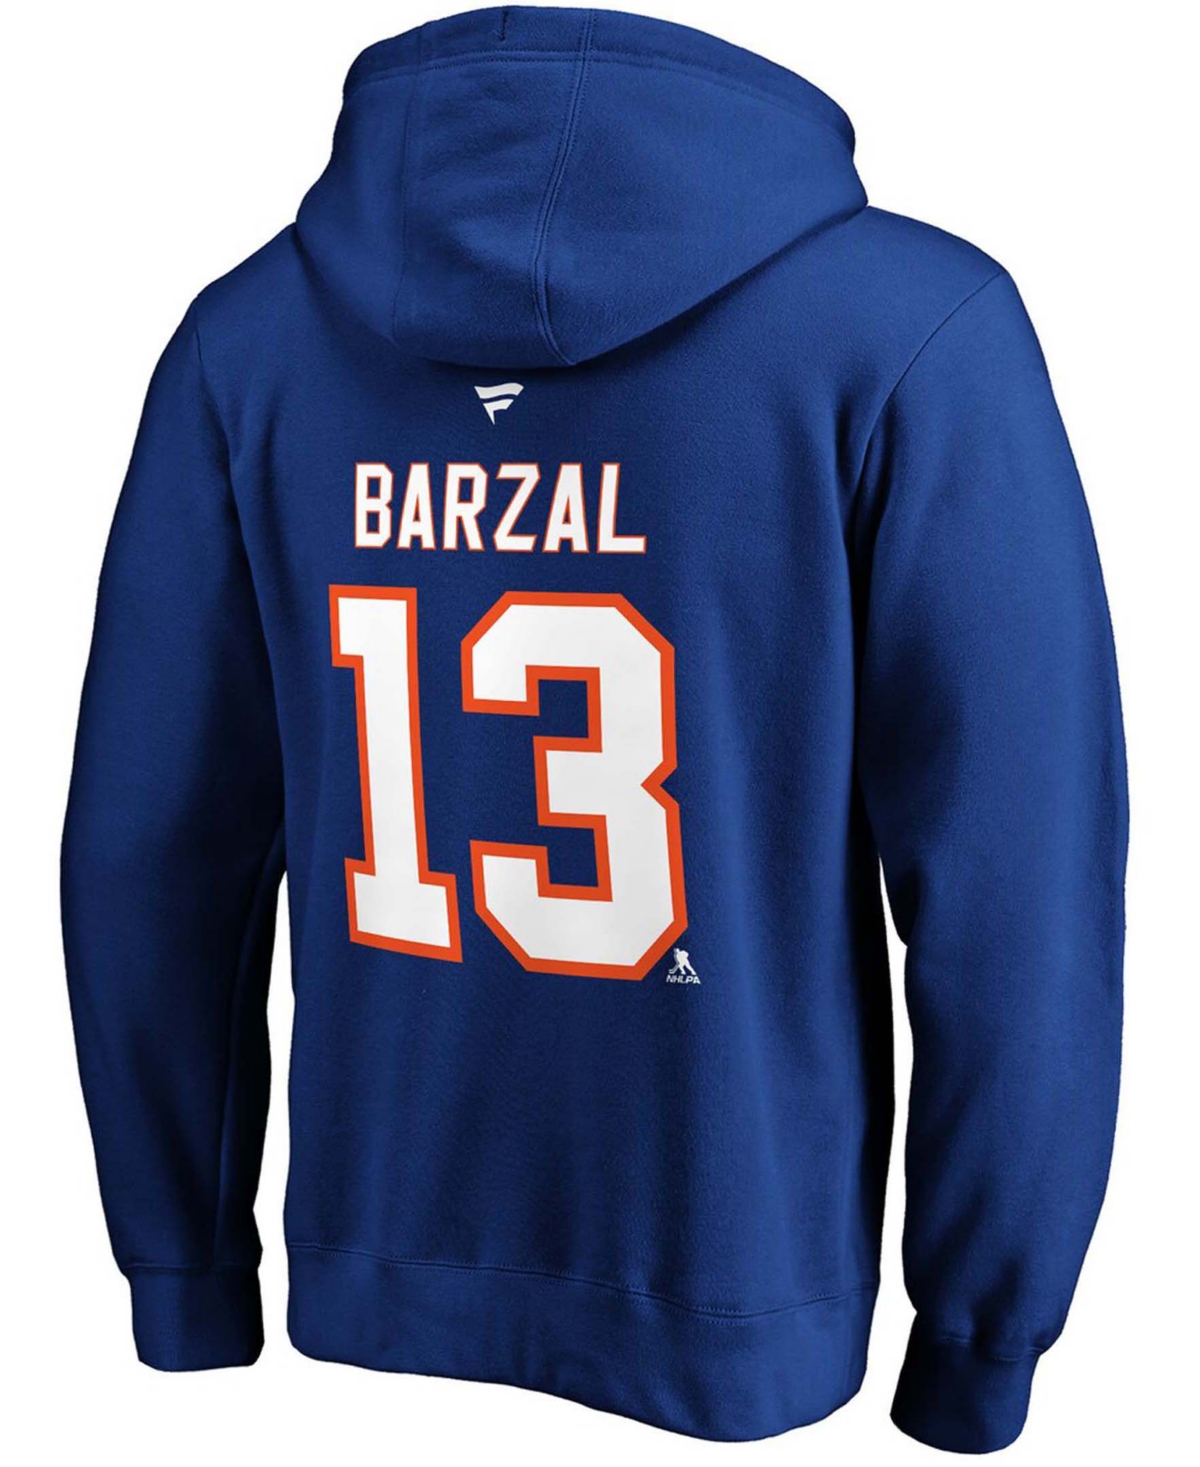 Shop Fanatics Men's Mathew Barzal Royal New York Islanders Authentic Stack Name And Number Pullover Hoodie